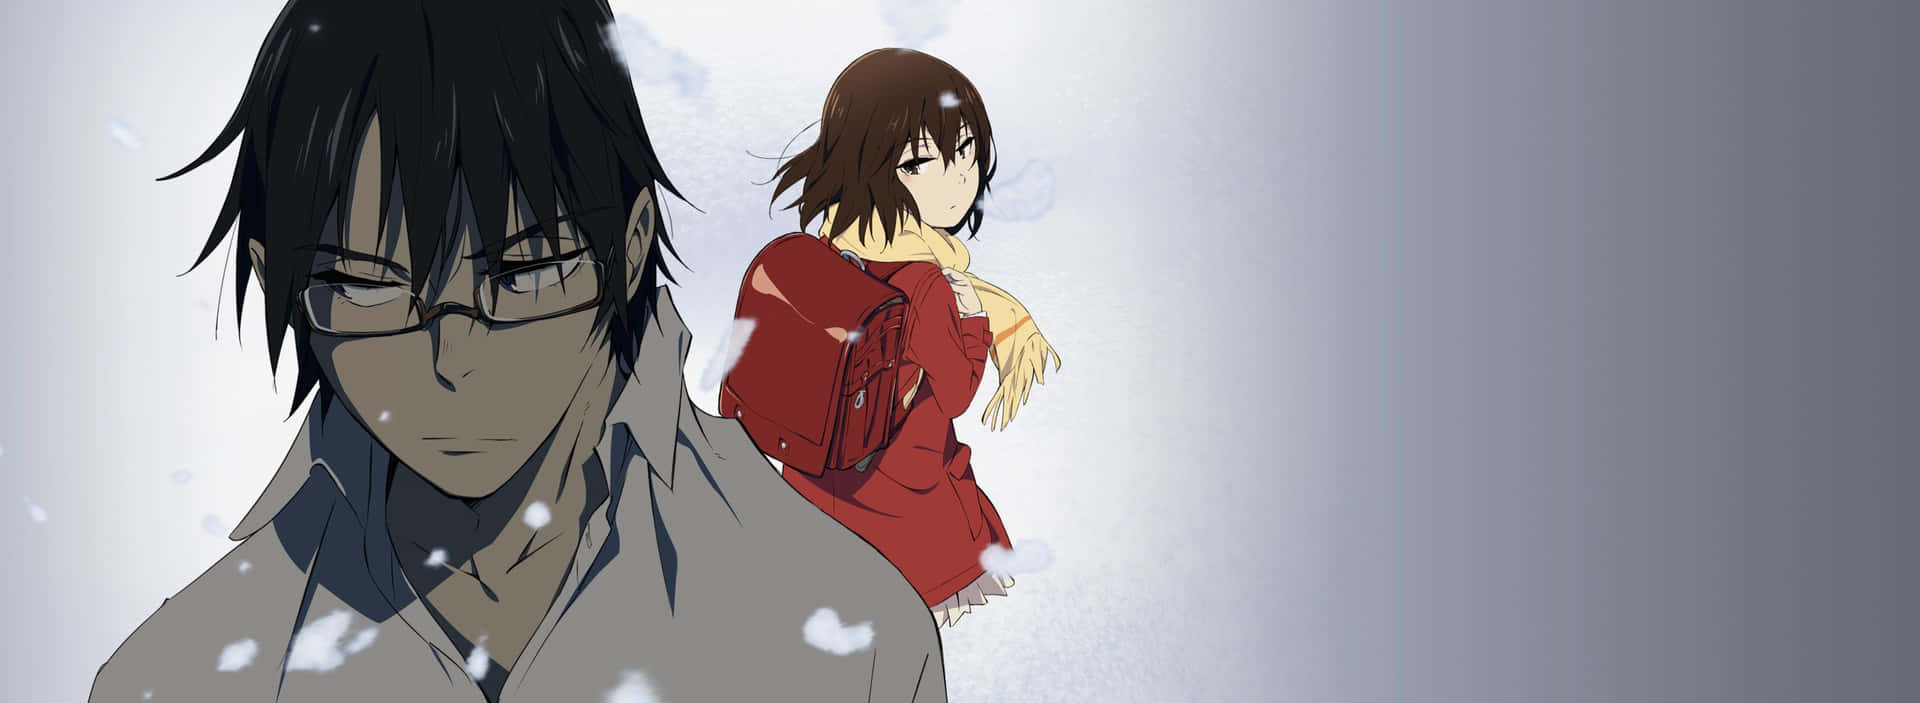 Overwhelmed with Fear in Erased